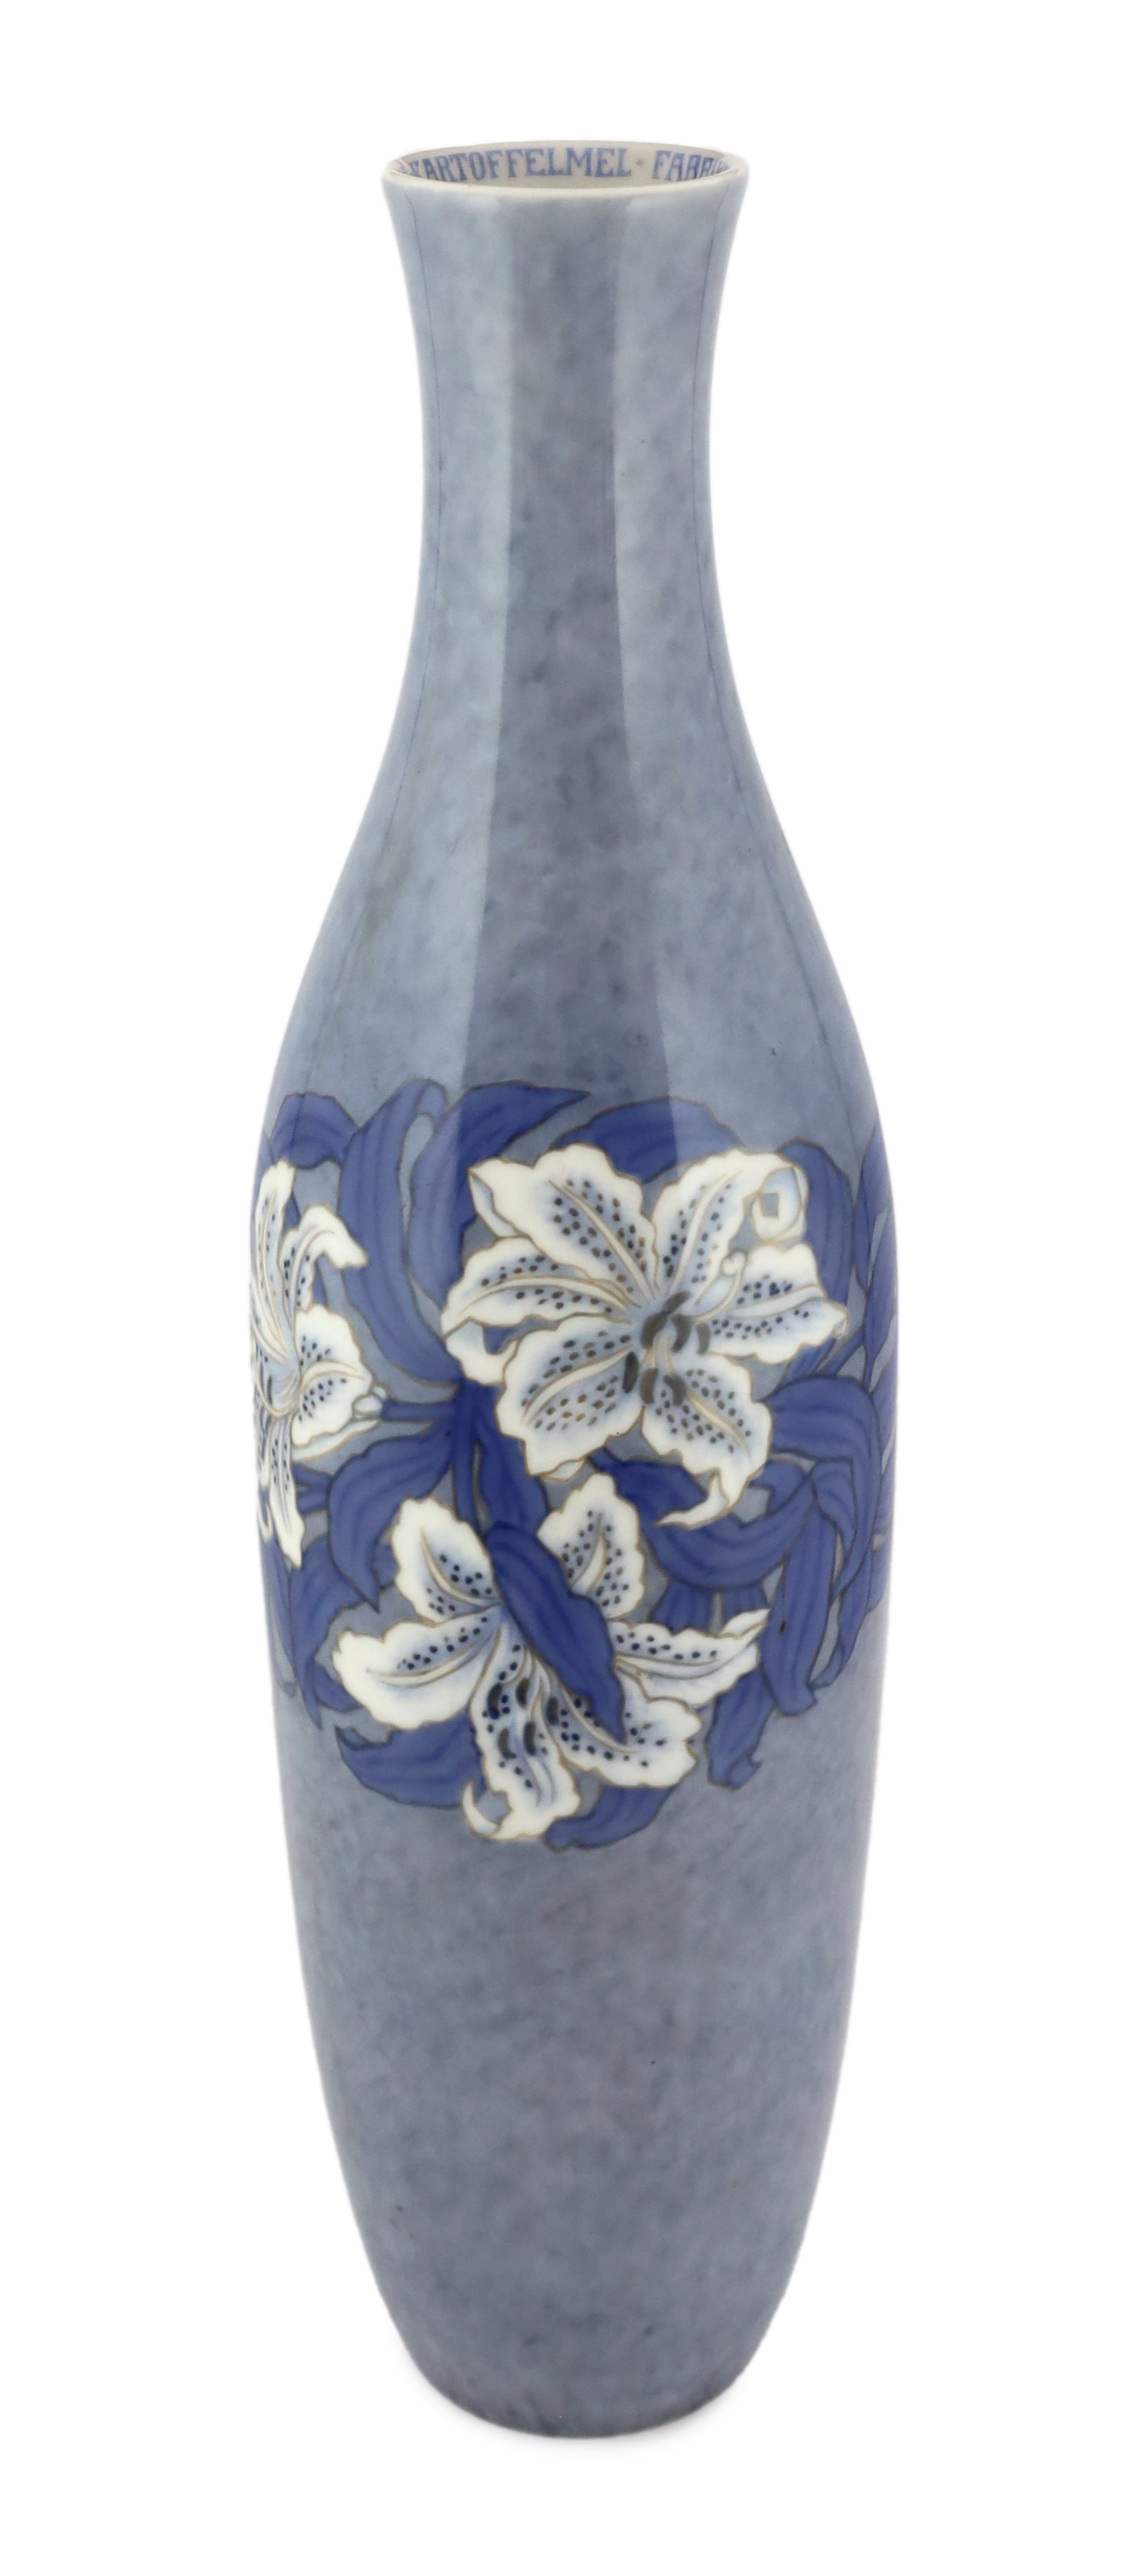 Catharina Zernichow for Royal Copenhagen, a large limited edition vase, dated 1920                                                                                                                                          